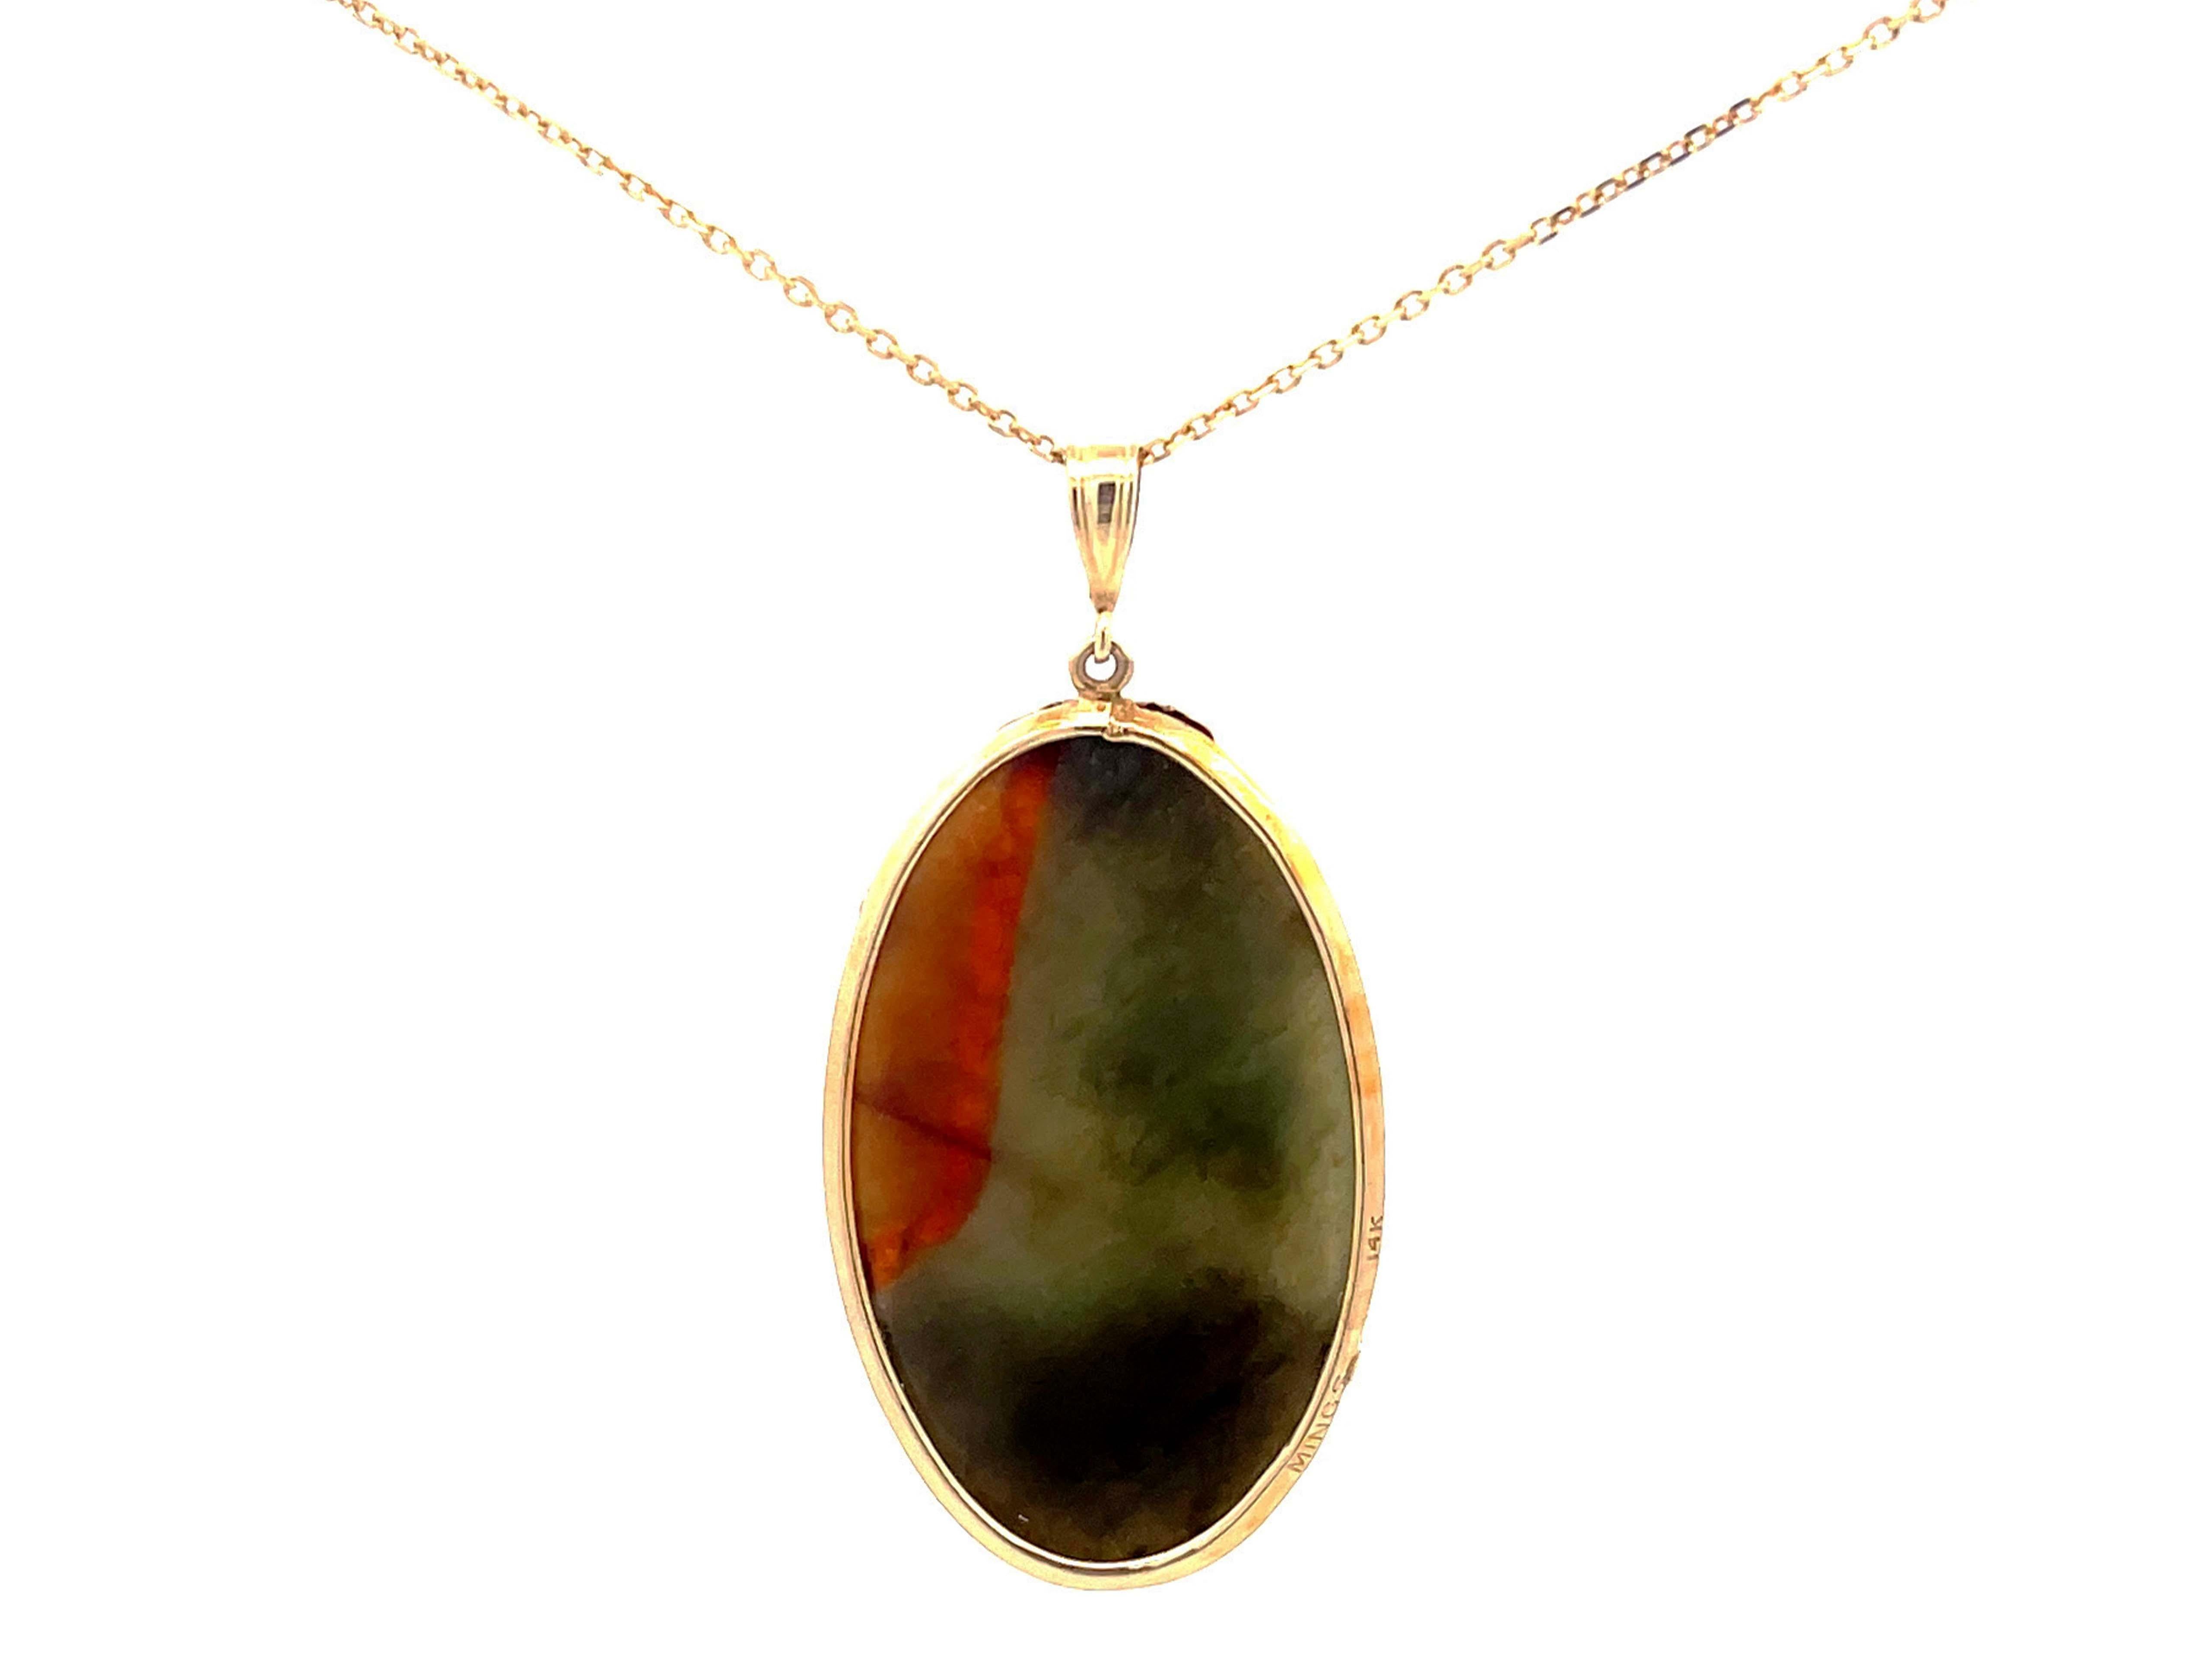 Mings Hawaii Carved Green and Red Oval Jade Pendant and Chain in 14k Yellow Gold In Excellent Condition For Sale In Honolulu, HI